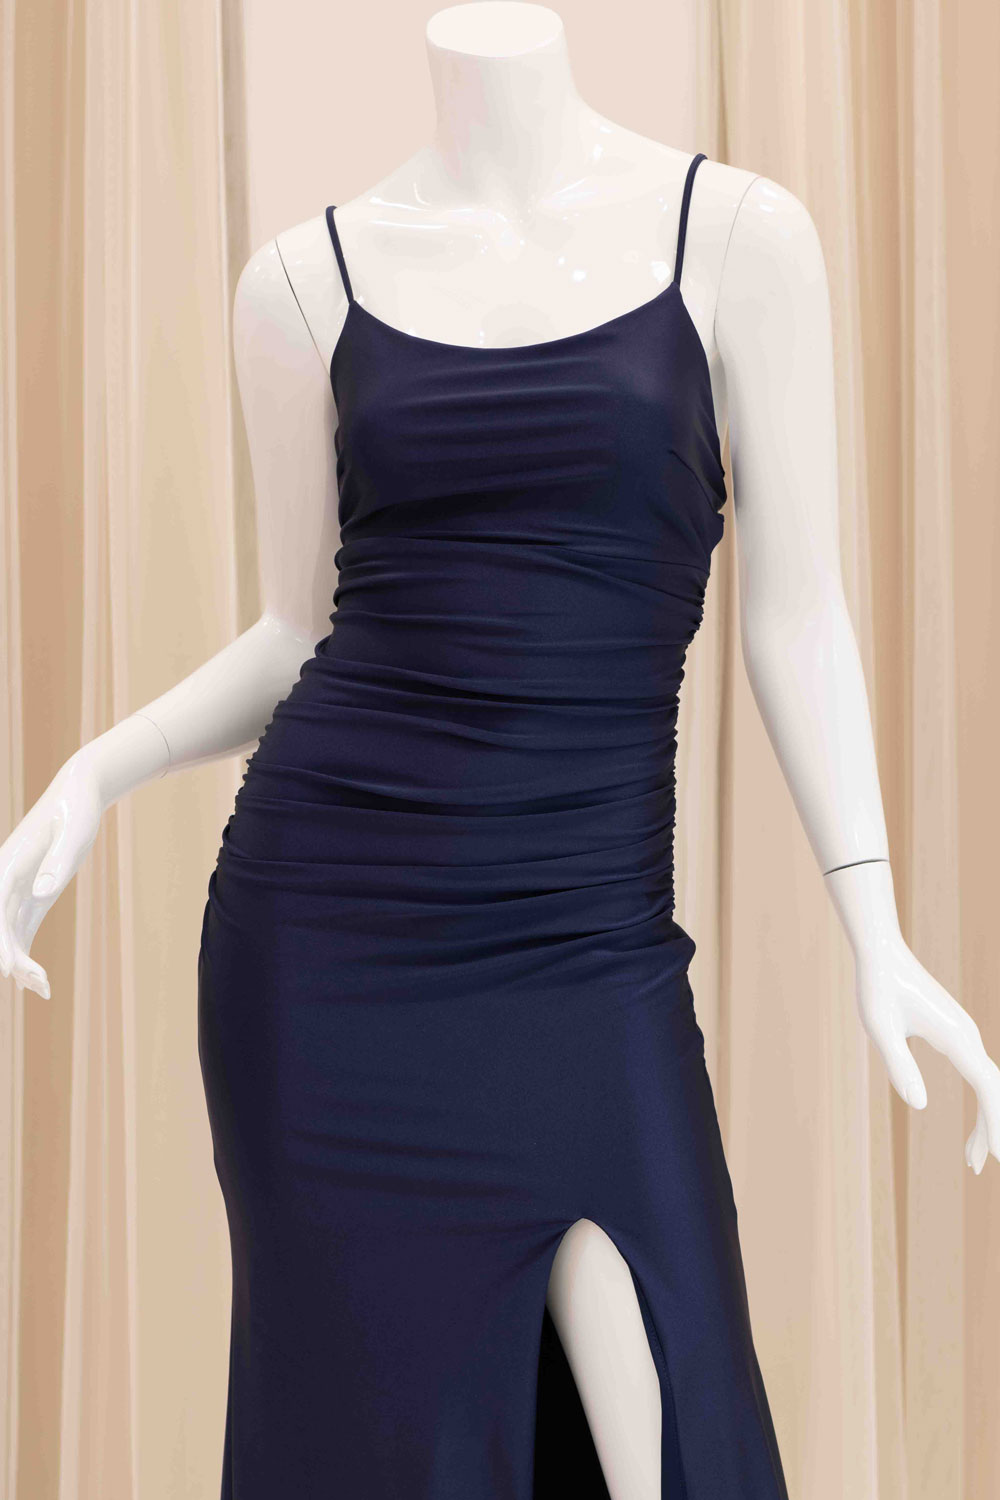 Mariana Ruched Evening Dress in Navy Blue